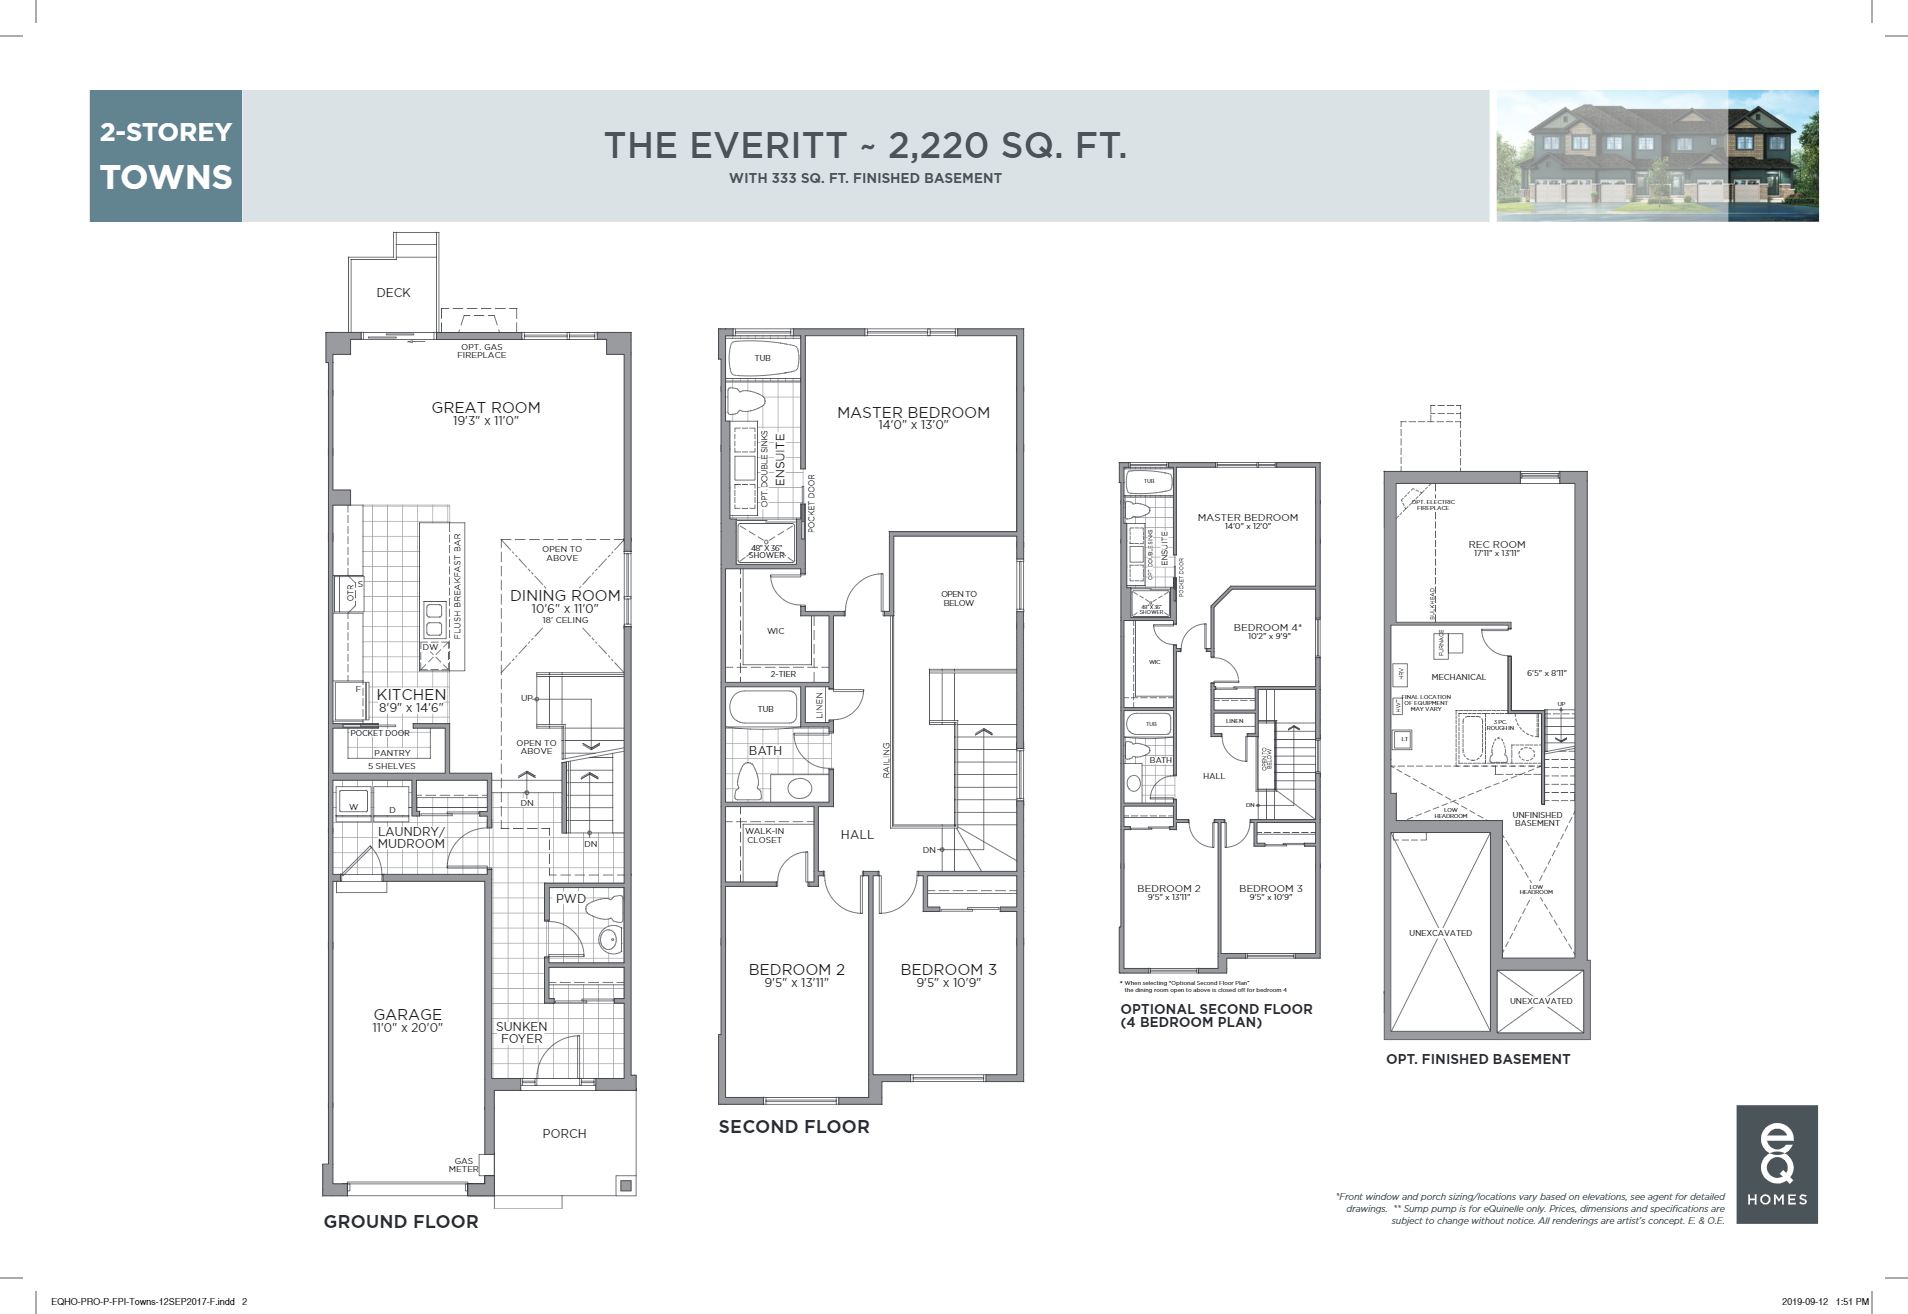 The Everitt Floor Plan of Provence, Orleans Town with undefined beds